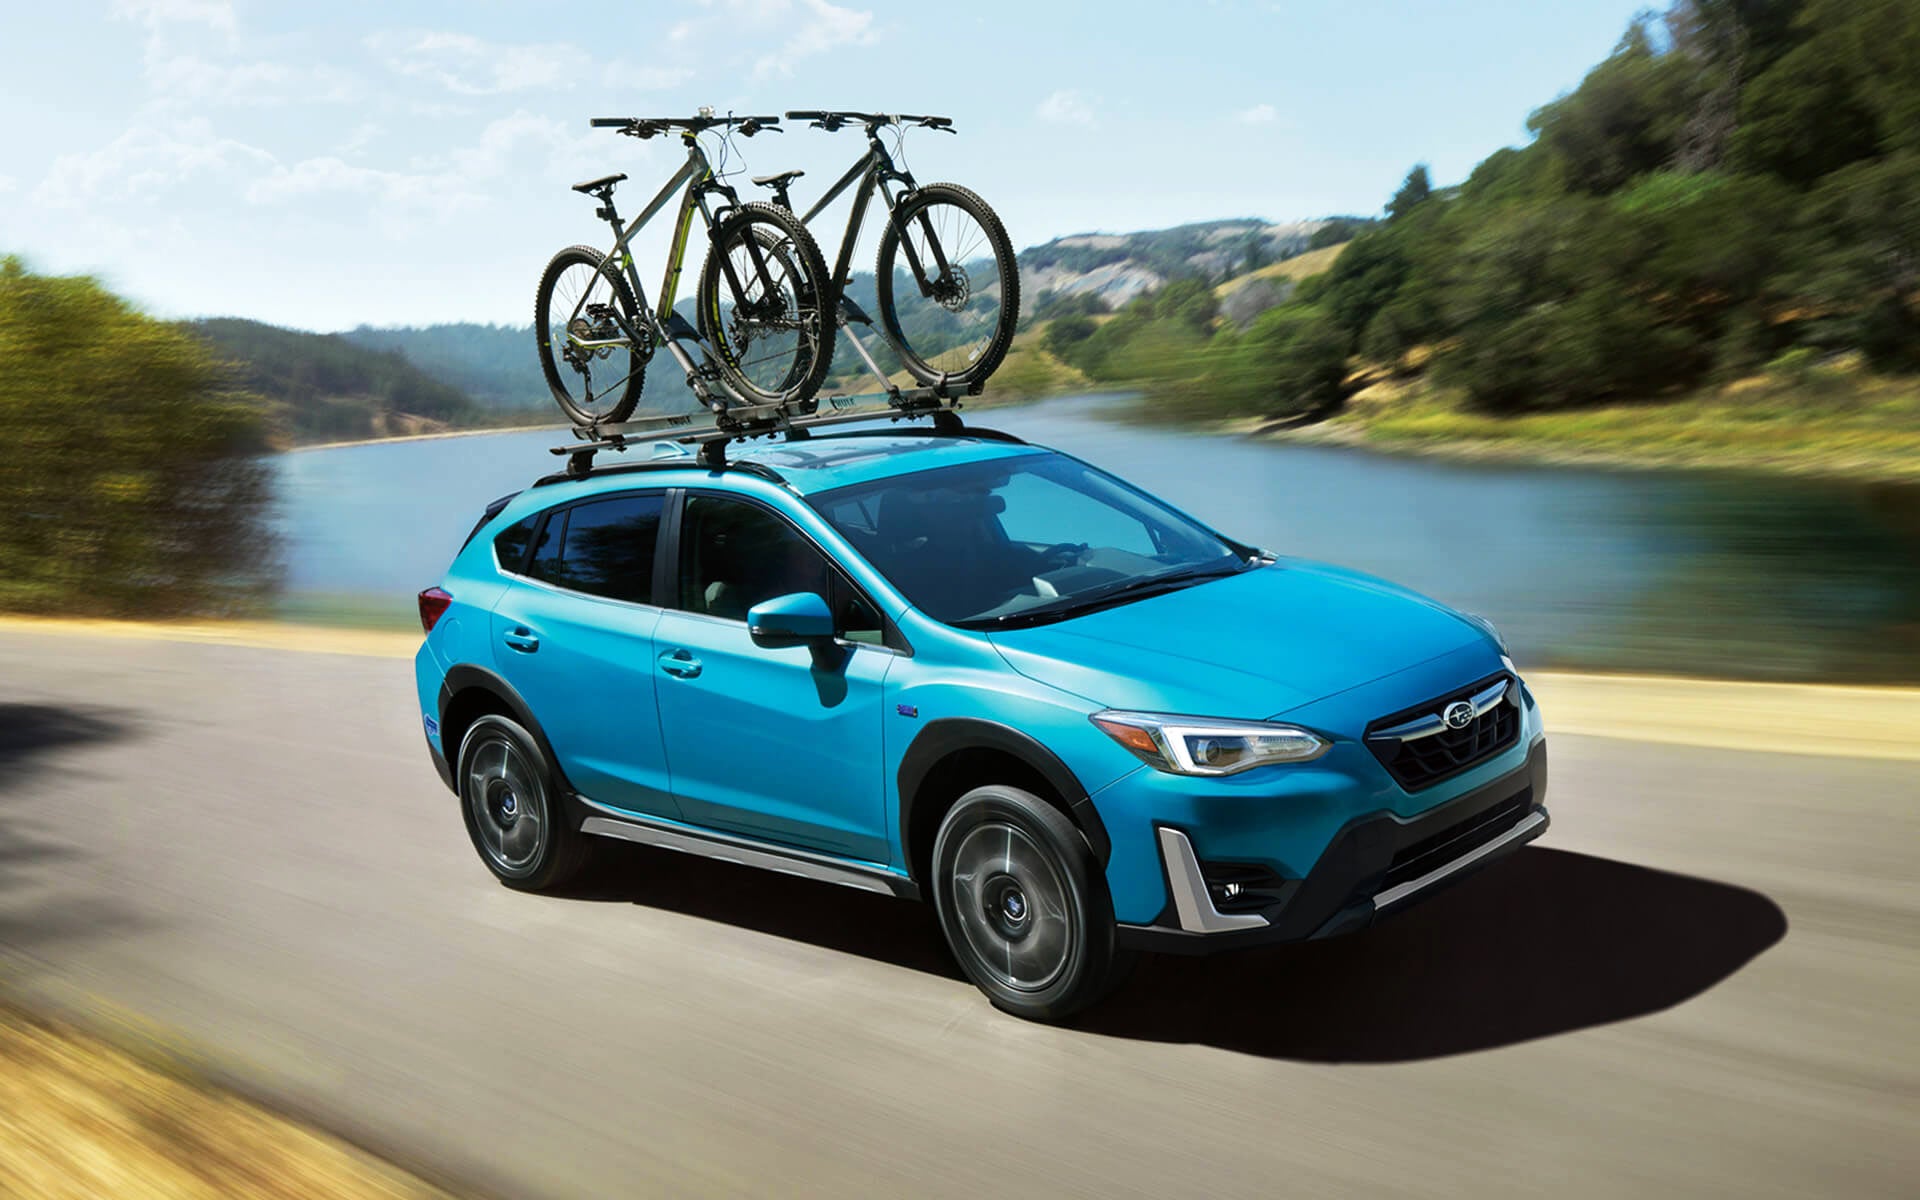 A blue Crosstrek Hybrid with two bicycles on its roof rack driving beside a river | Fuccillo Subaru in Watertown NY